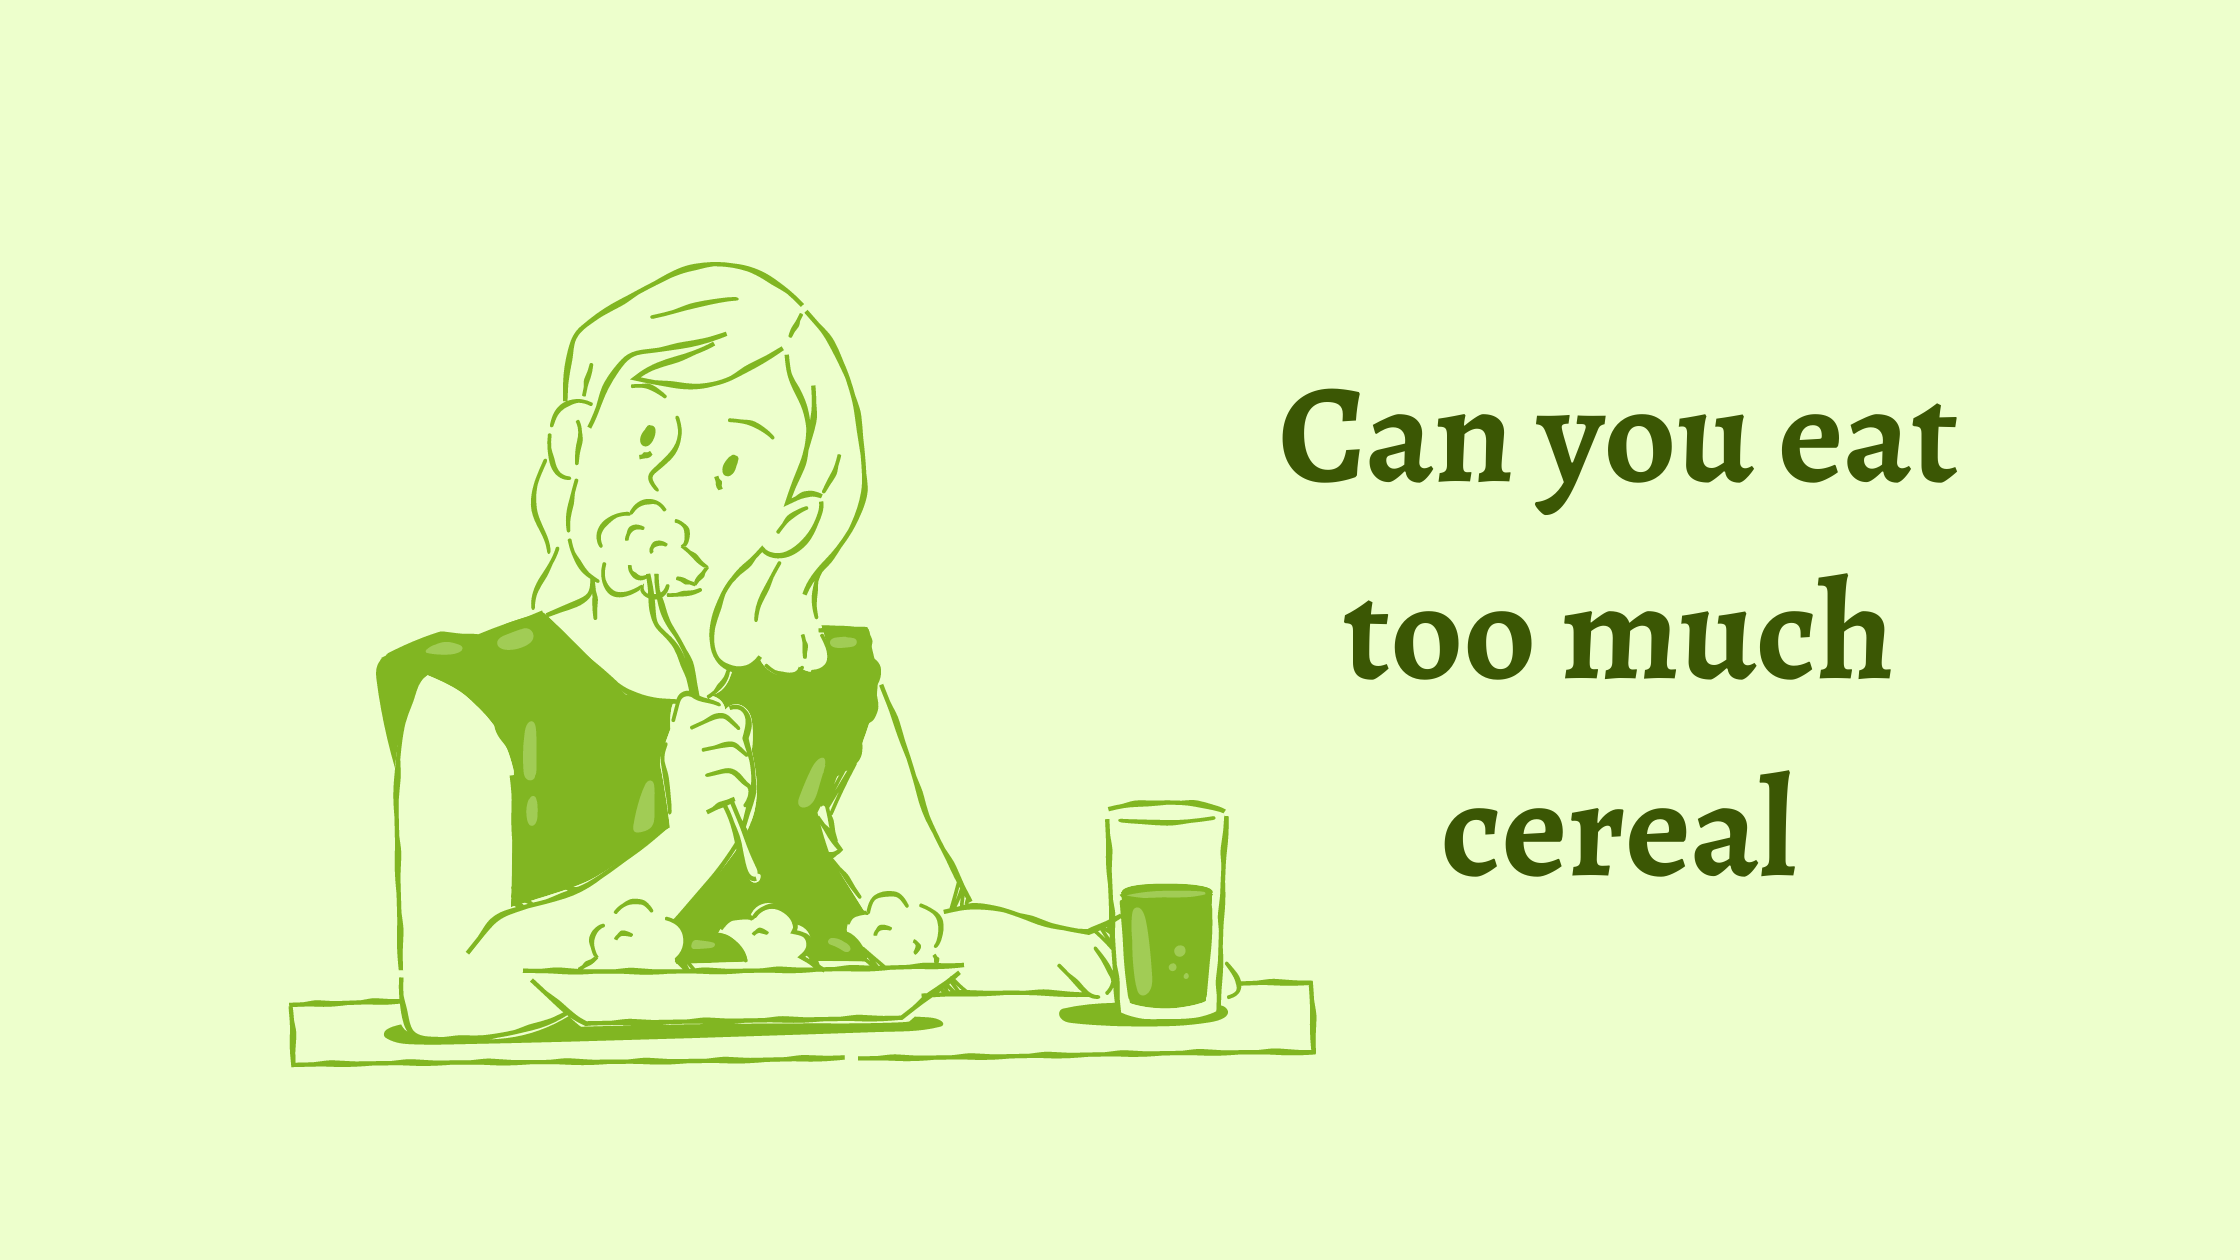 Can you eat too much cereal